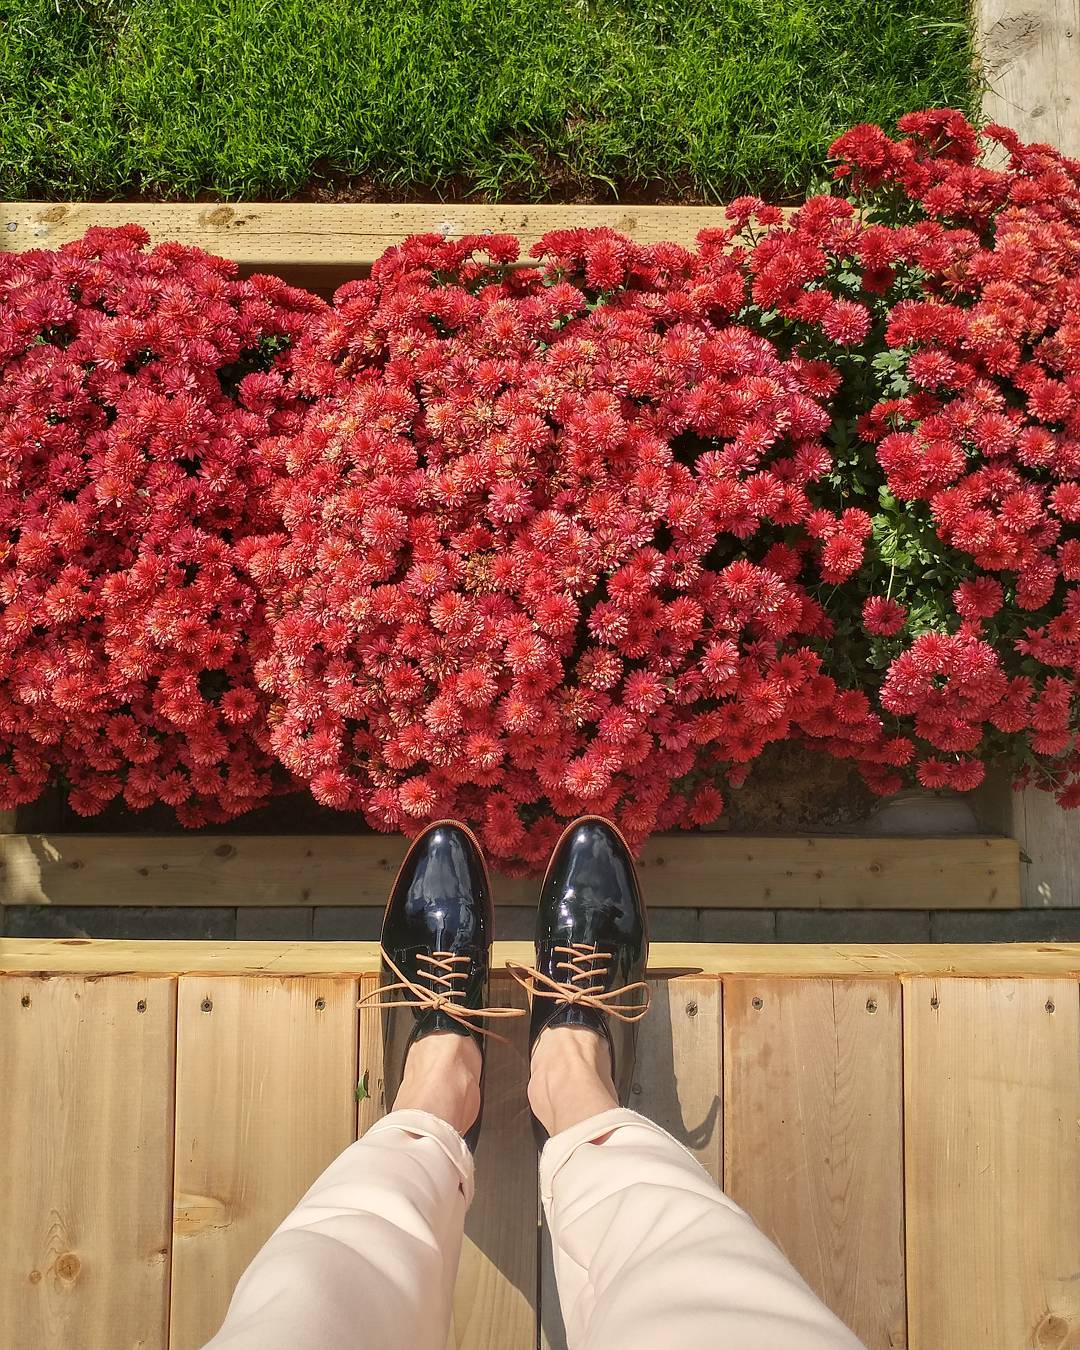 New shoes overlooking red strawflowers